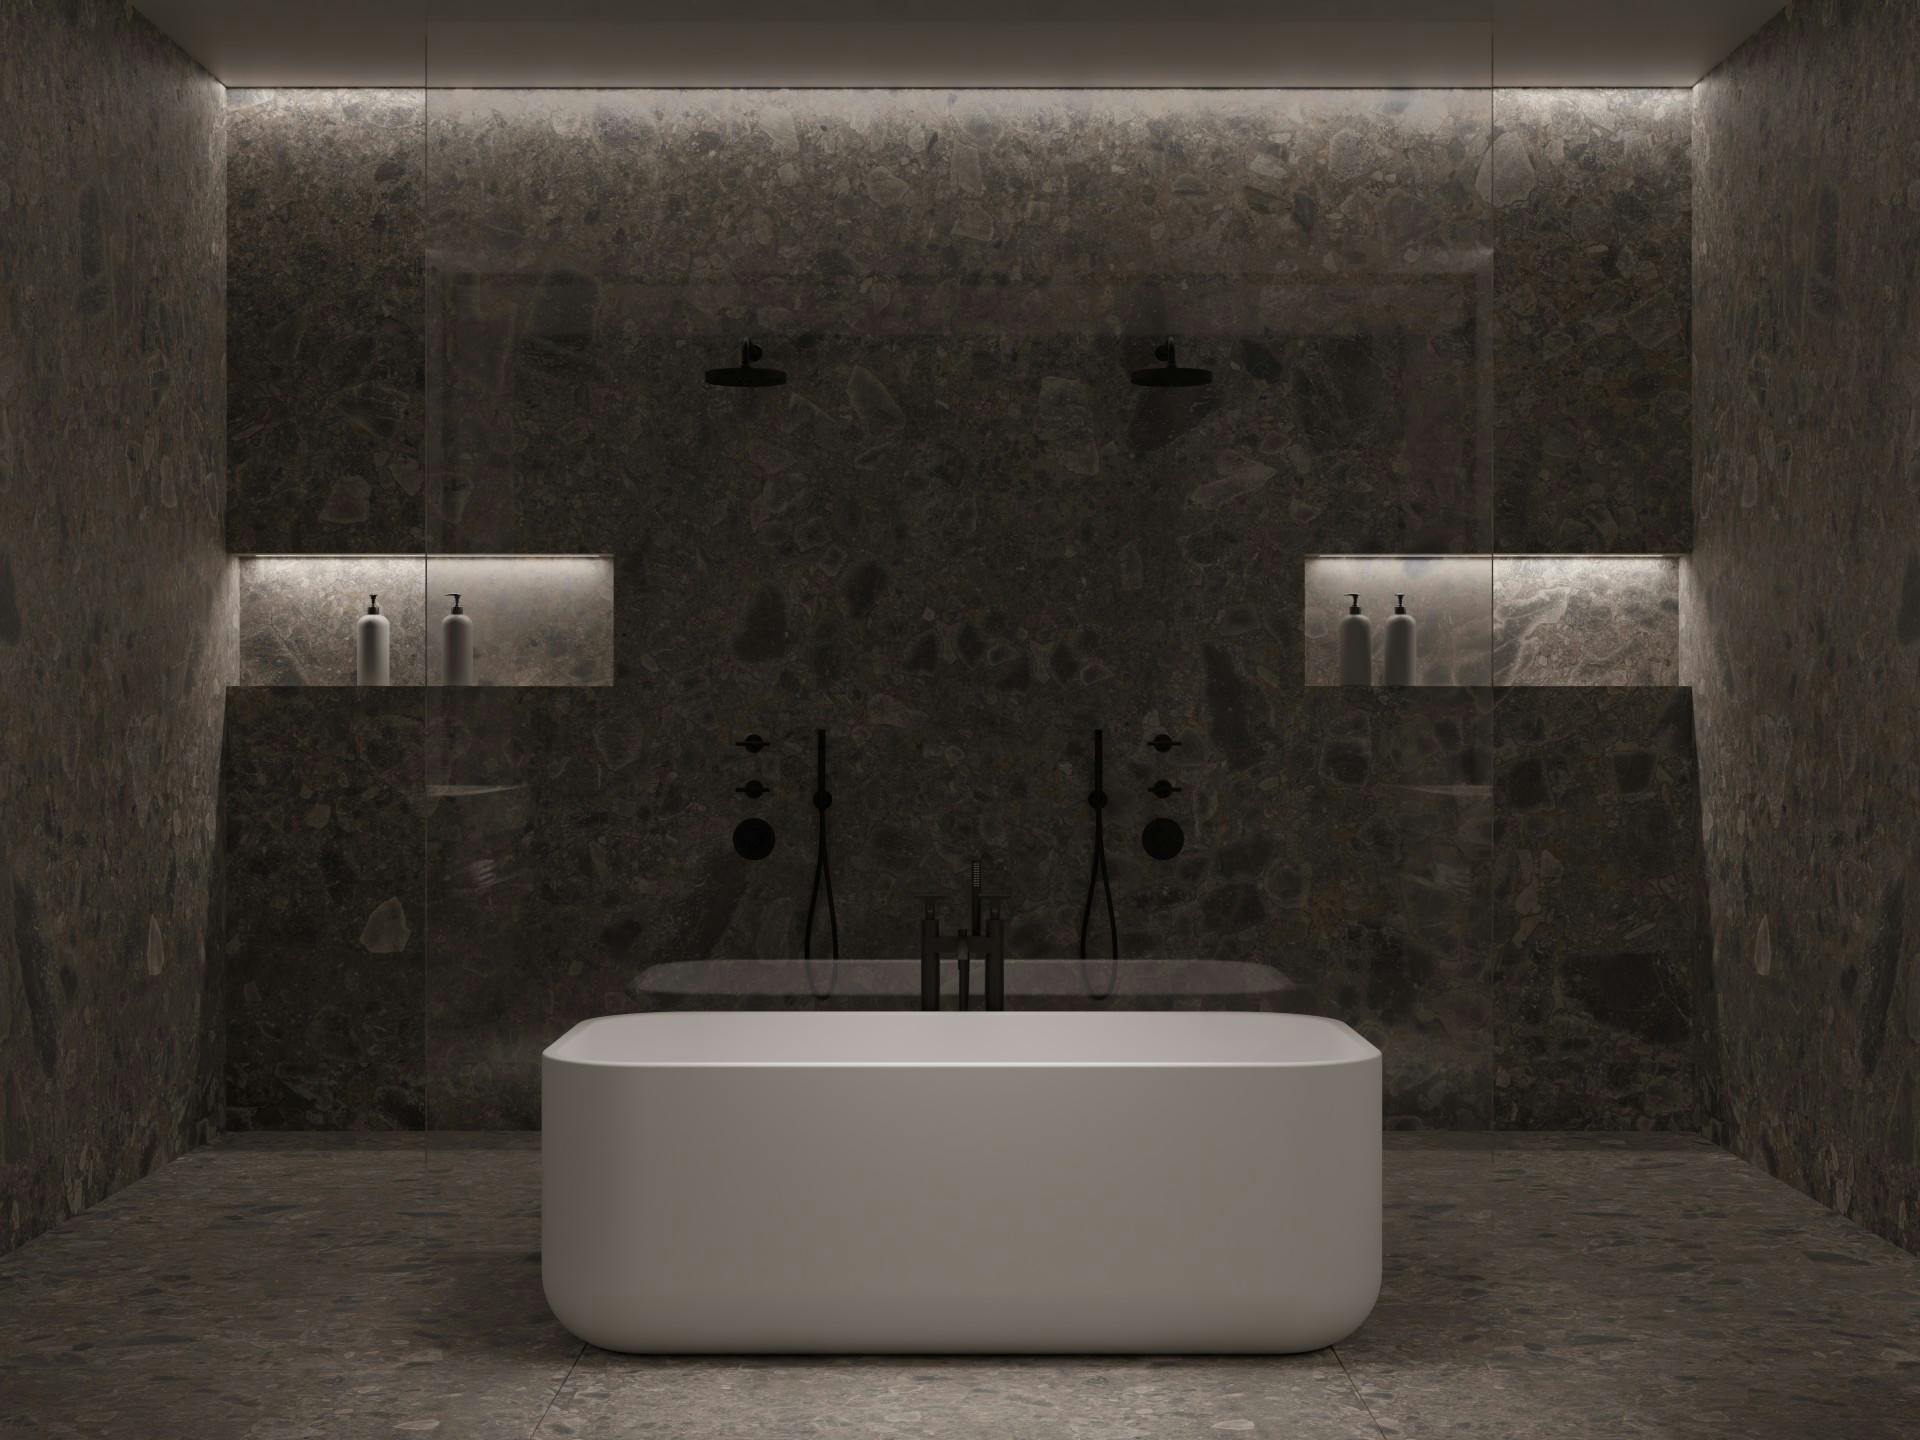 Numéro d'image 41 de la section actuelle de The Palazzo: the bathroom designed by Remy Meijers in which the shower takes centre stage de Cosentino Canada